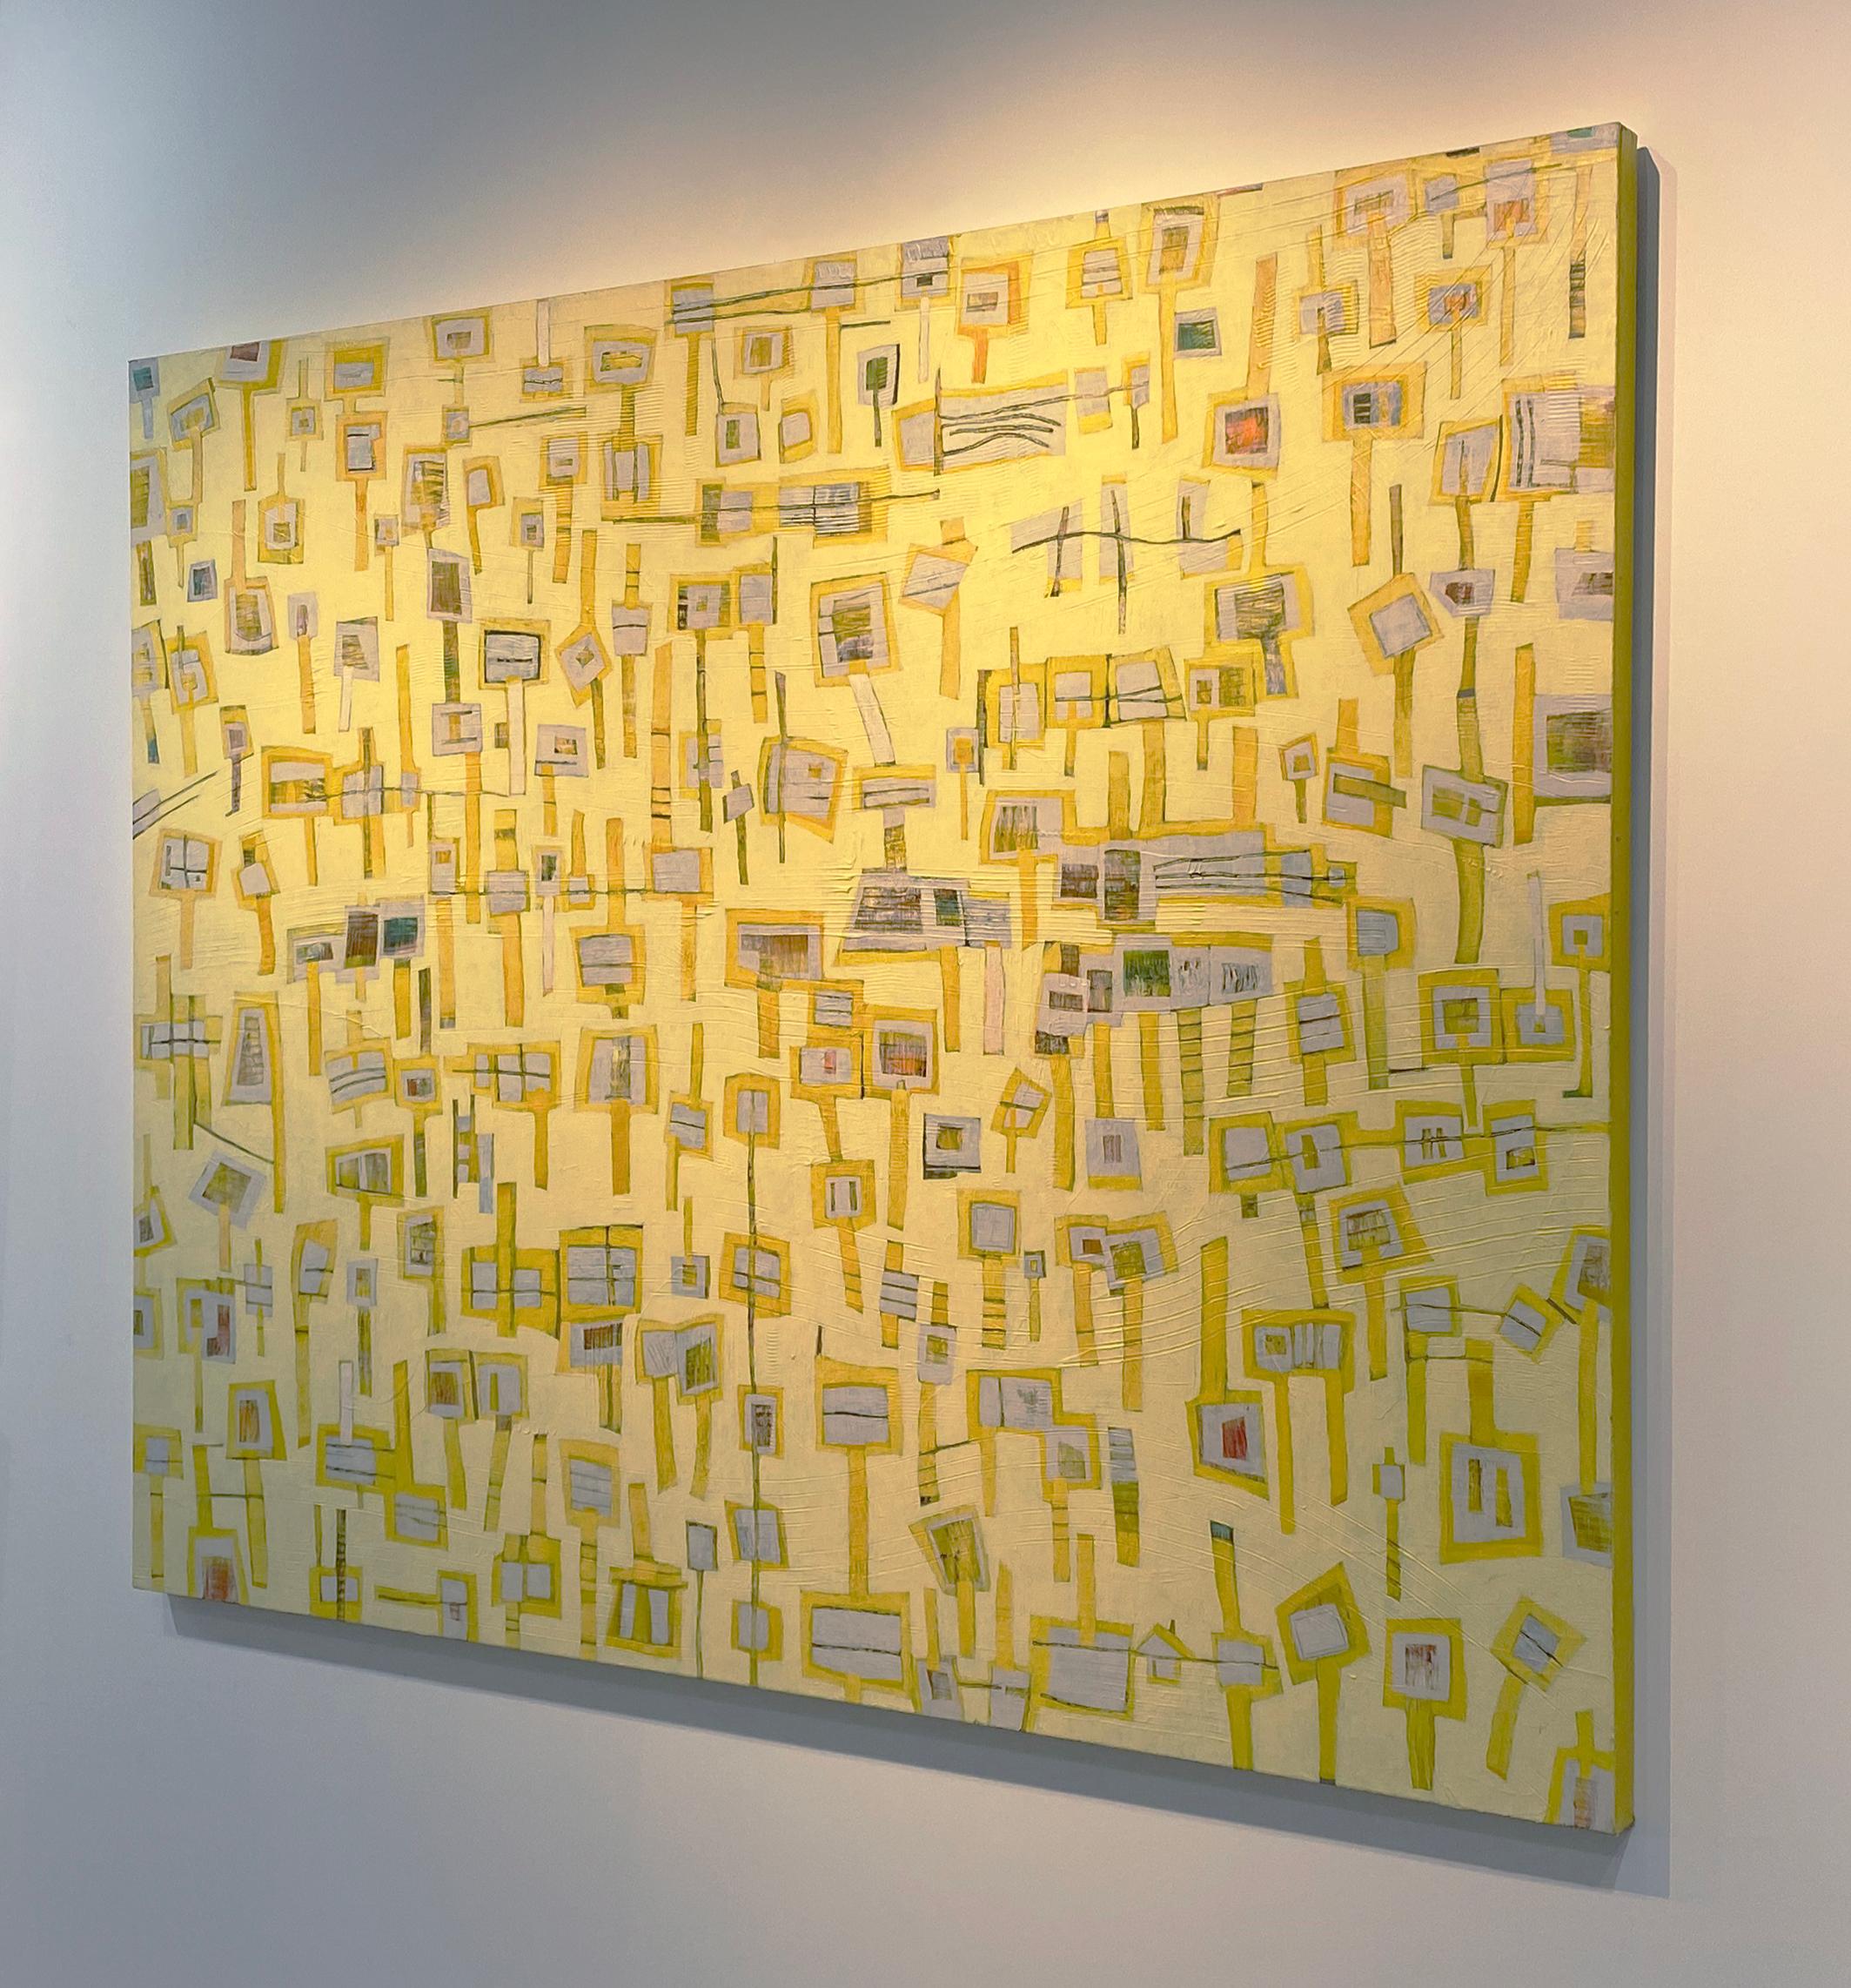 This large-scale statement painting is made with acrylic paint on canvas. Bright yellow and grey rectangles are joined together to create shapes reminiscent of geometric lollipops. Accents of deep red and blue can also be seen throughout. The